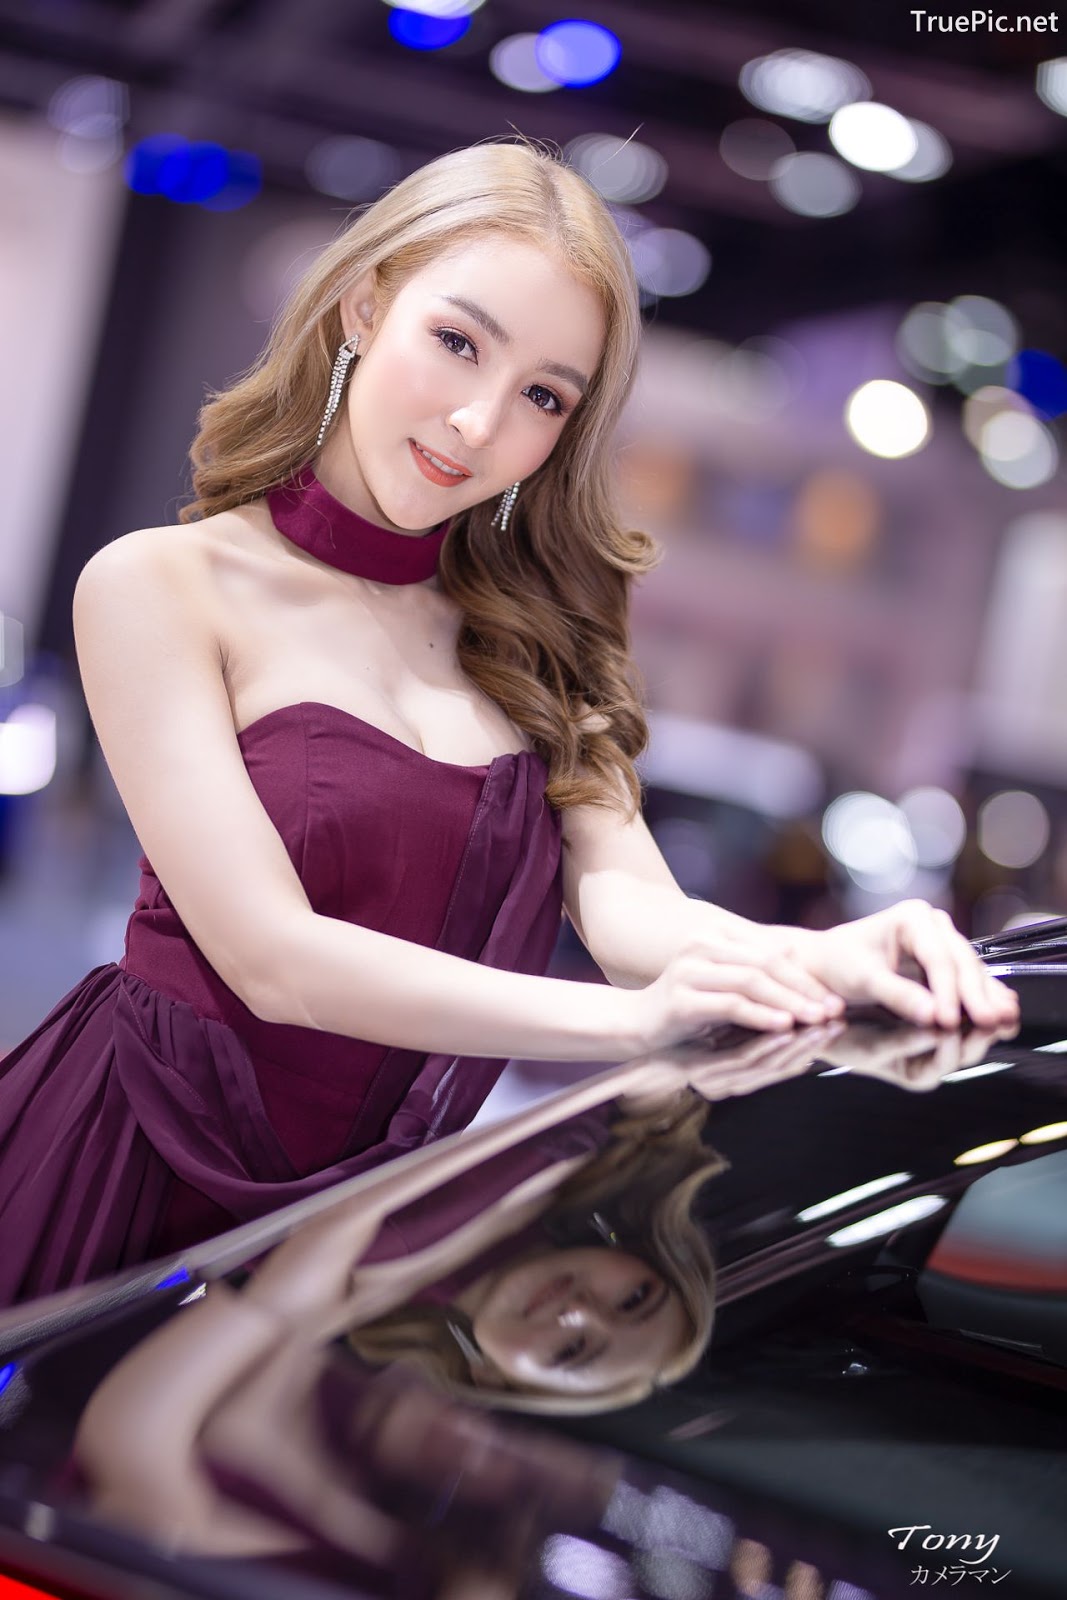 Image-Thailand-Hot-Model-Thai-Racing-Girl-At-Motor-Show-2019-TruePic.net- Picture-94